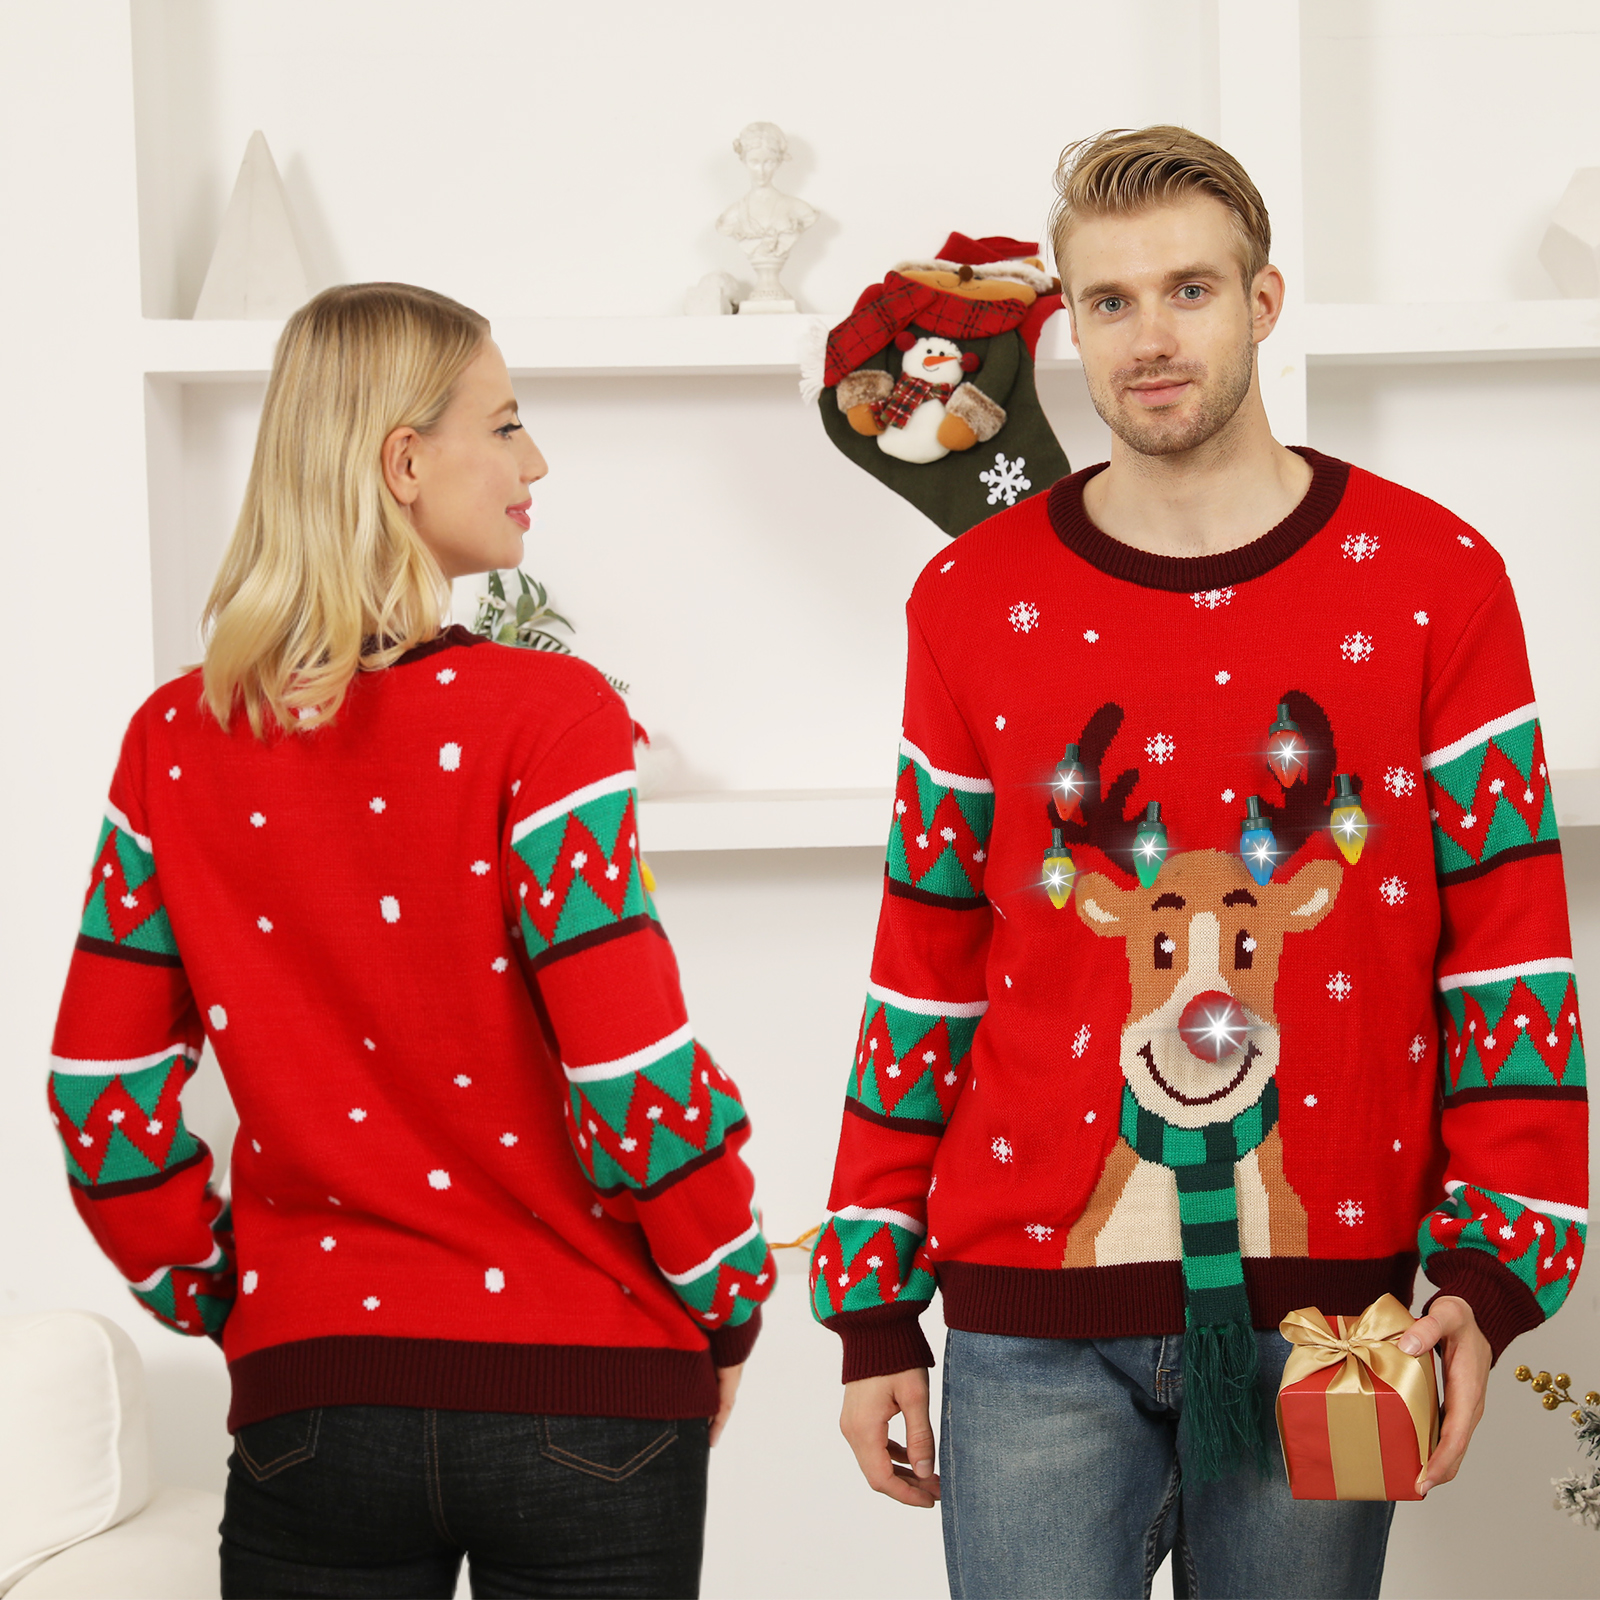 Ugly Christmas Sweater for Women Men,Light up Christmas Sweater,Funny Unisex Reindeer Xmas Ugly Sweaters for Couples - image 3 of 6